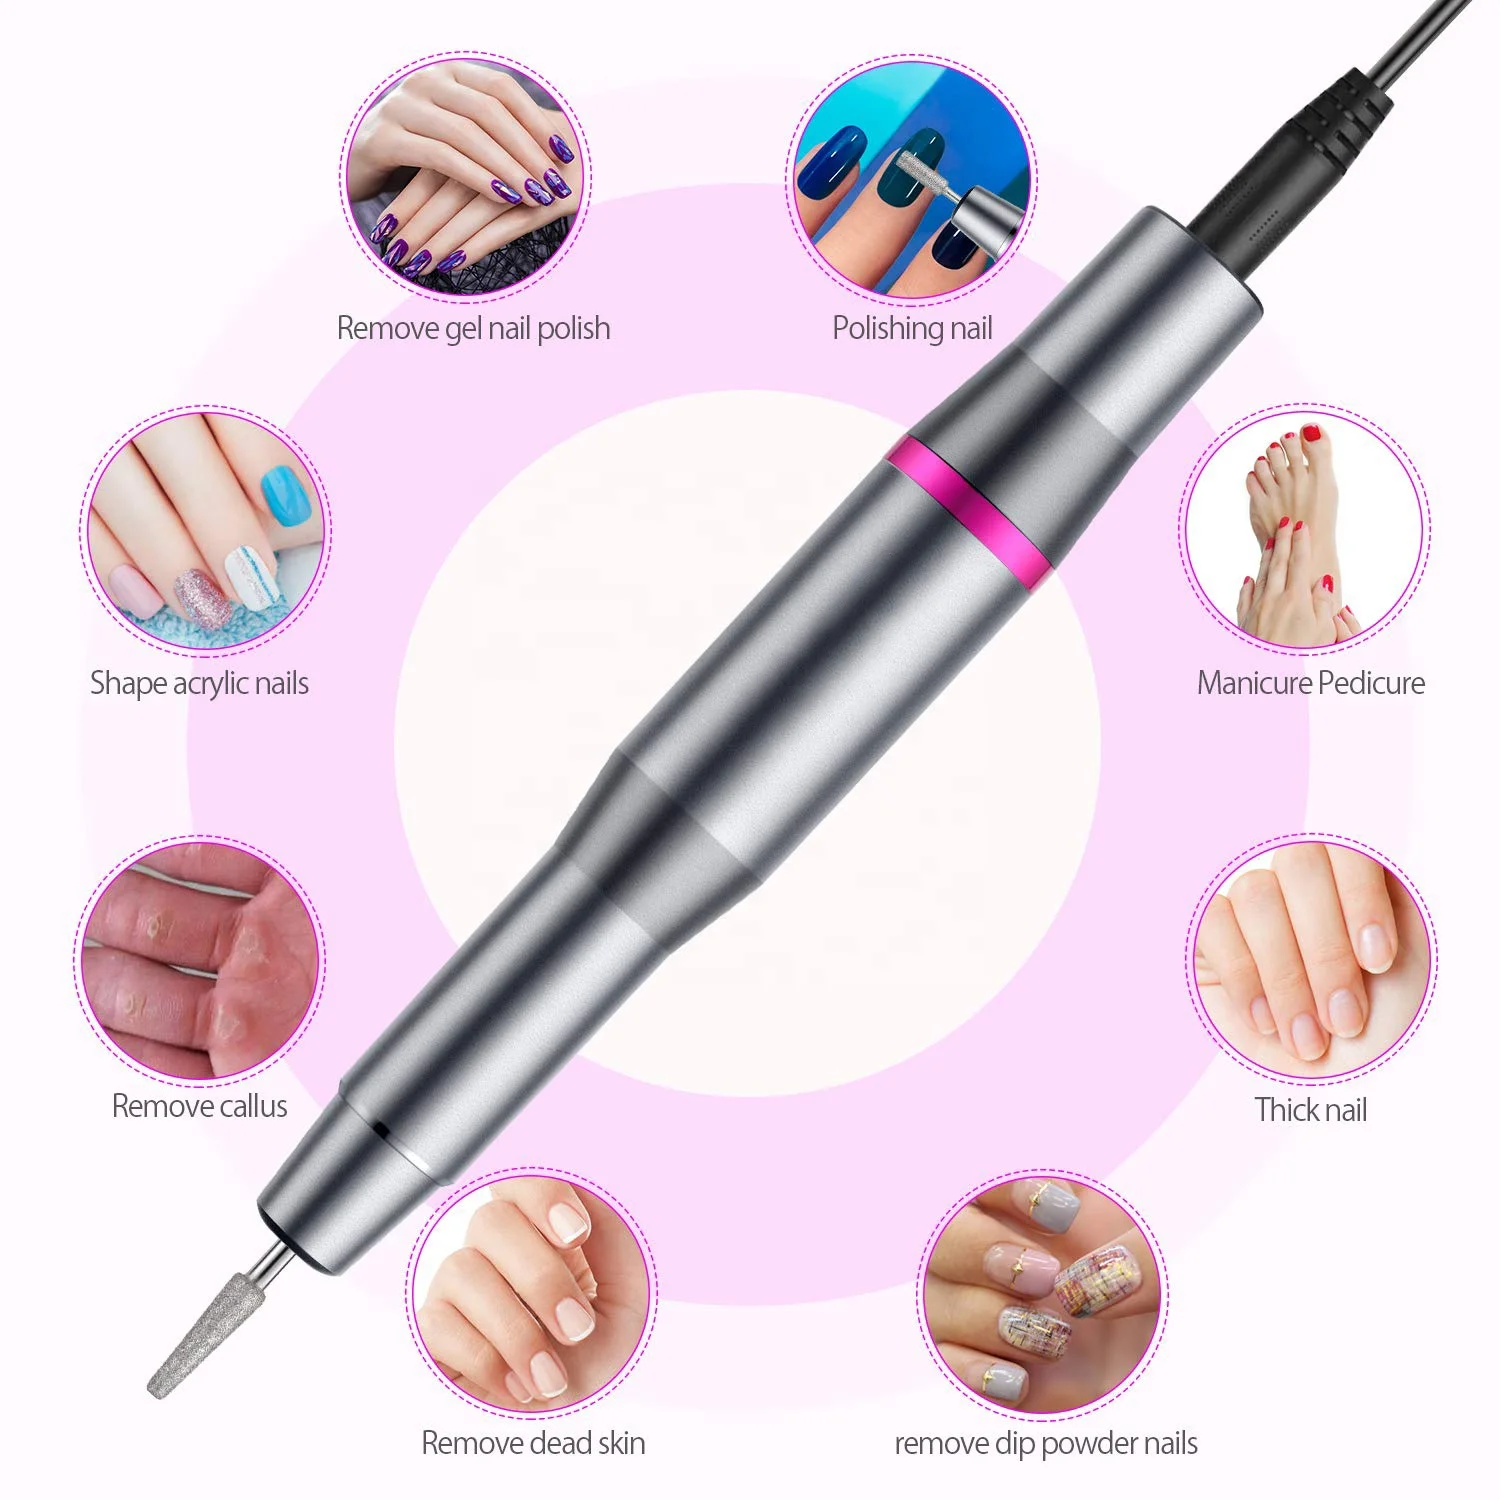 
Electric Nail Drill, Upgraded Professional Nail File Portable Manicure Pedicure Drill Kit for Acrylic Nails, Gel Grinder Tools 